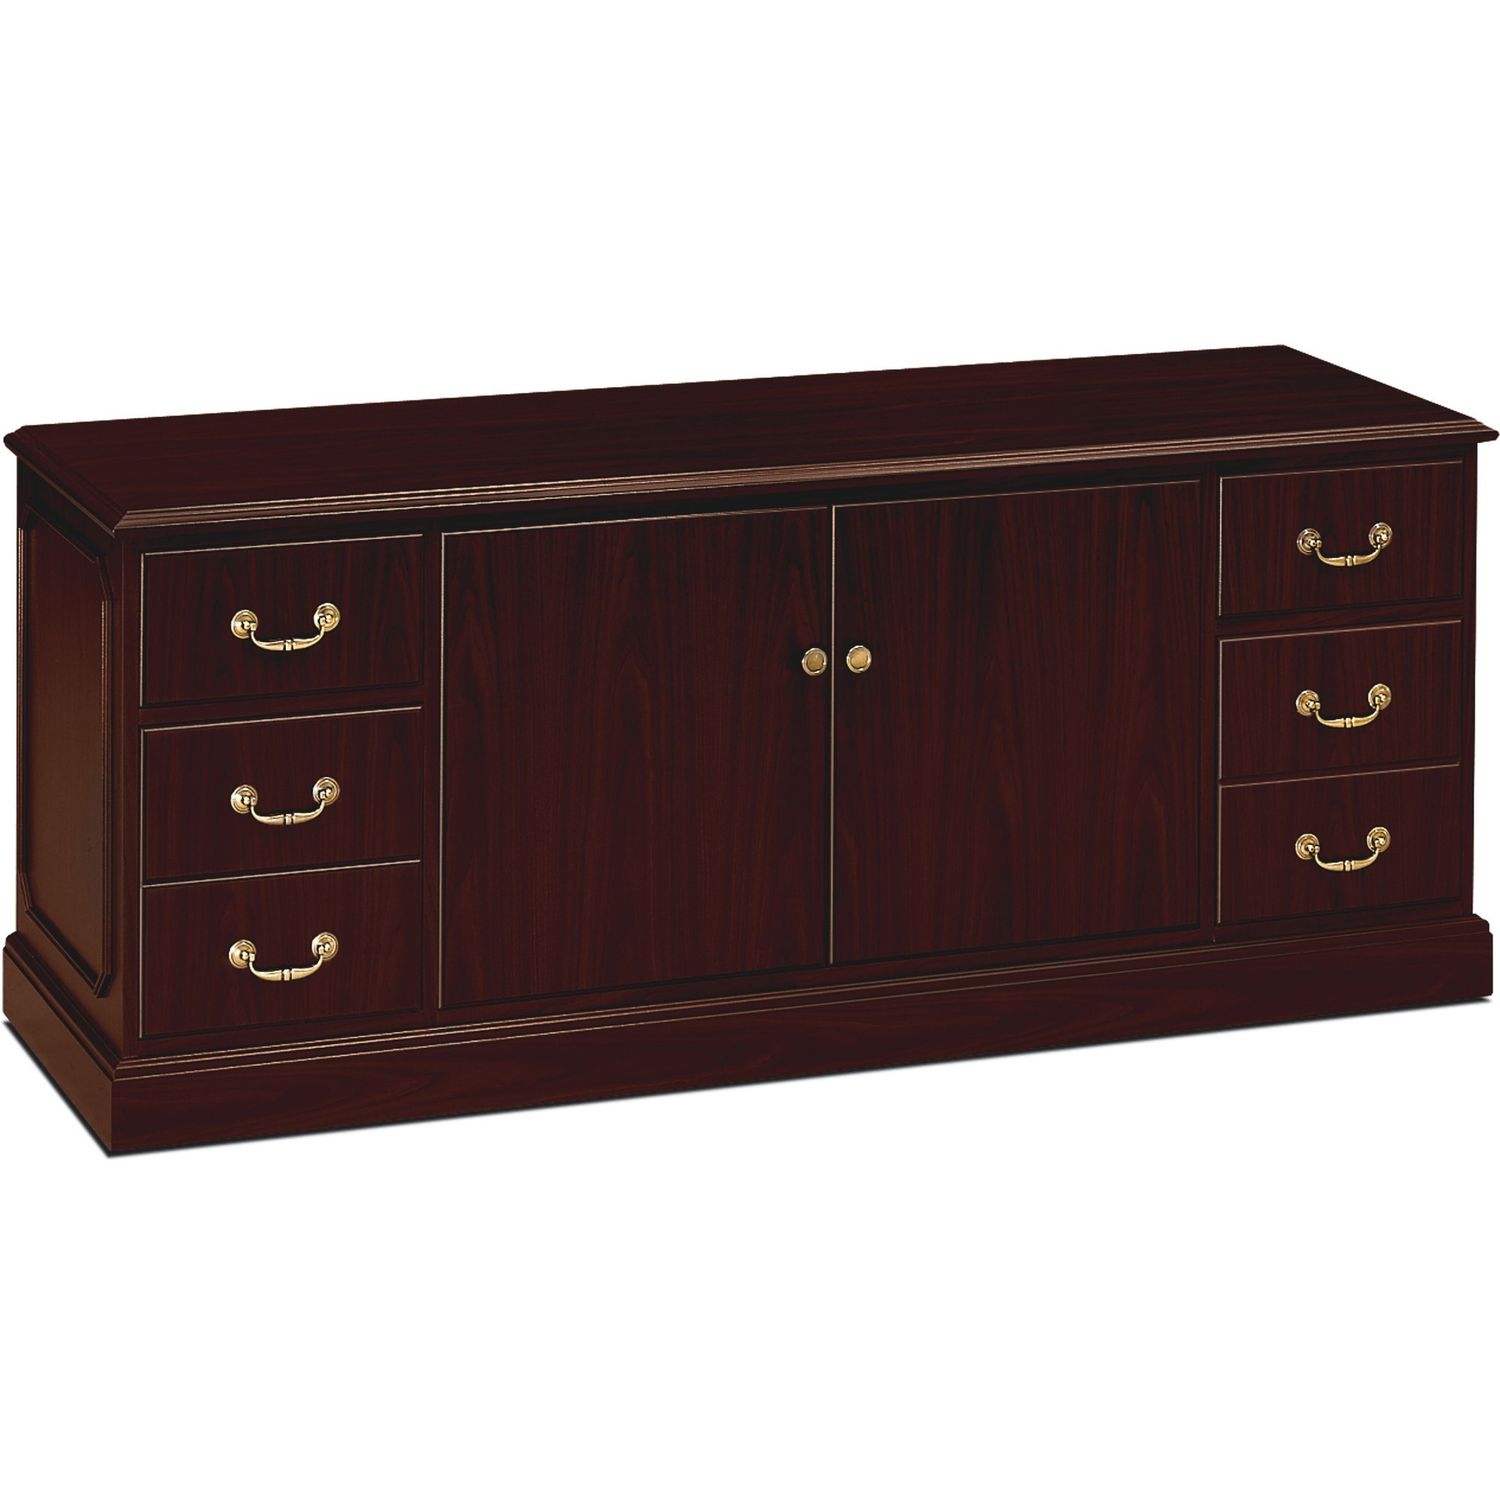 94000 Series Double Credenza 72"W, Laminated Rectangle Top, 4 Drawers x 72" Table Top Width x 24" Table Top Depth x 1.13" Table Top Thickness, 29.50" Height, Mahogany